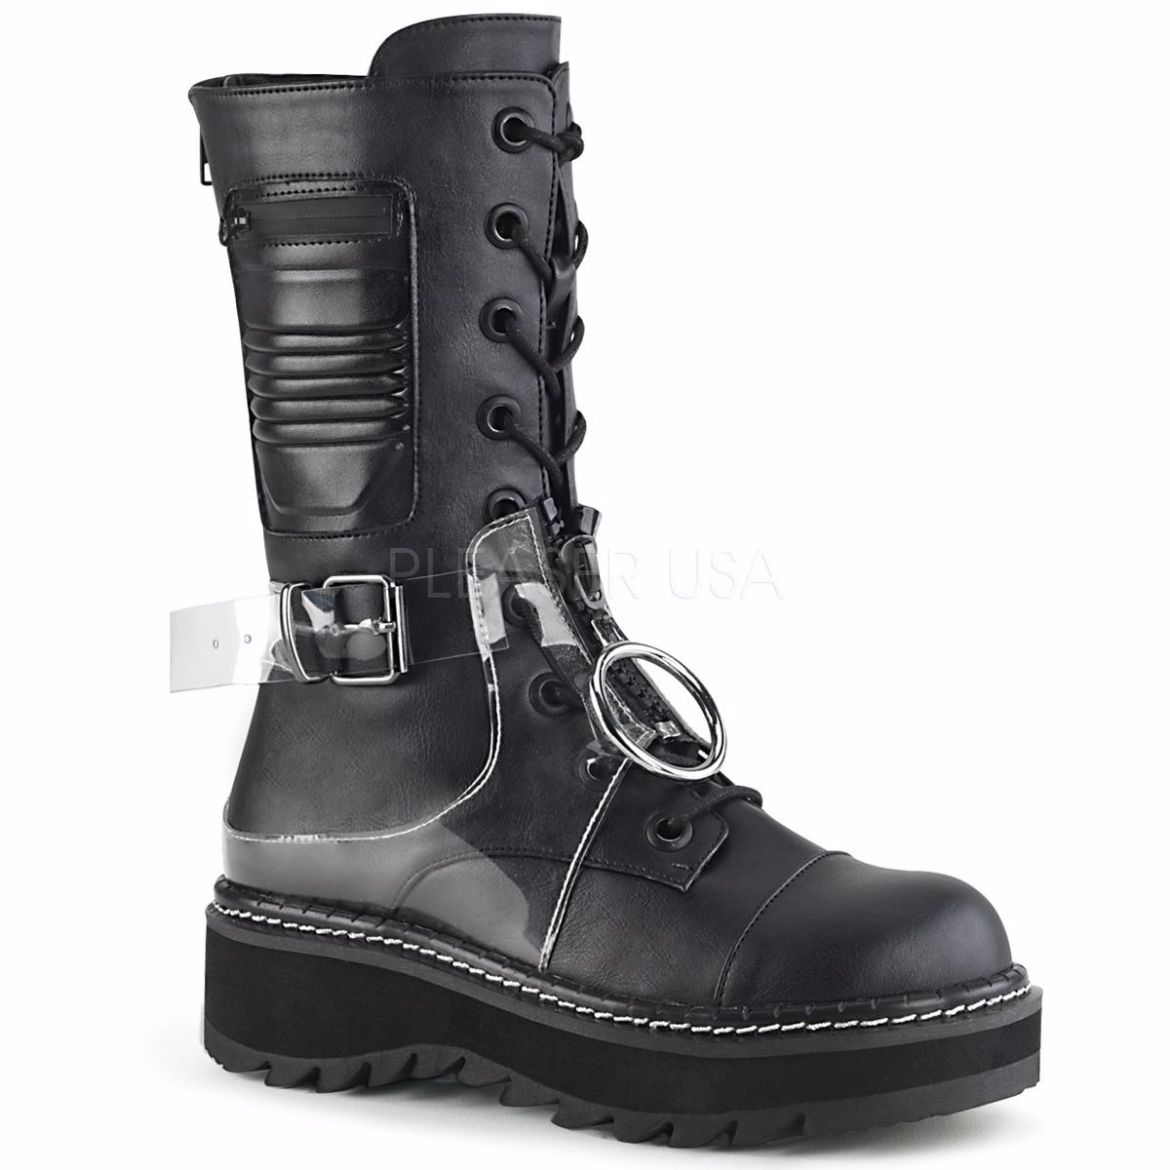 Product image of Demonia LILITH-271 Black Vegan Faux Leather-Clear Polyurethane (Pu) 1 1/4 inch Platform Lace-Up Mid-Calf Boot Back Zip